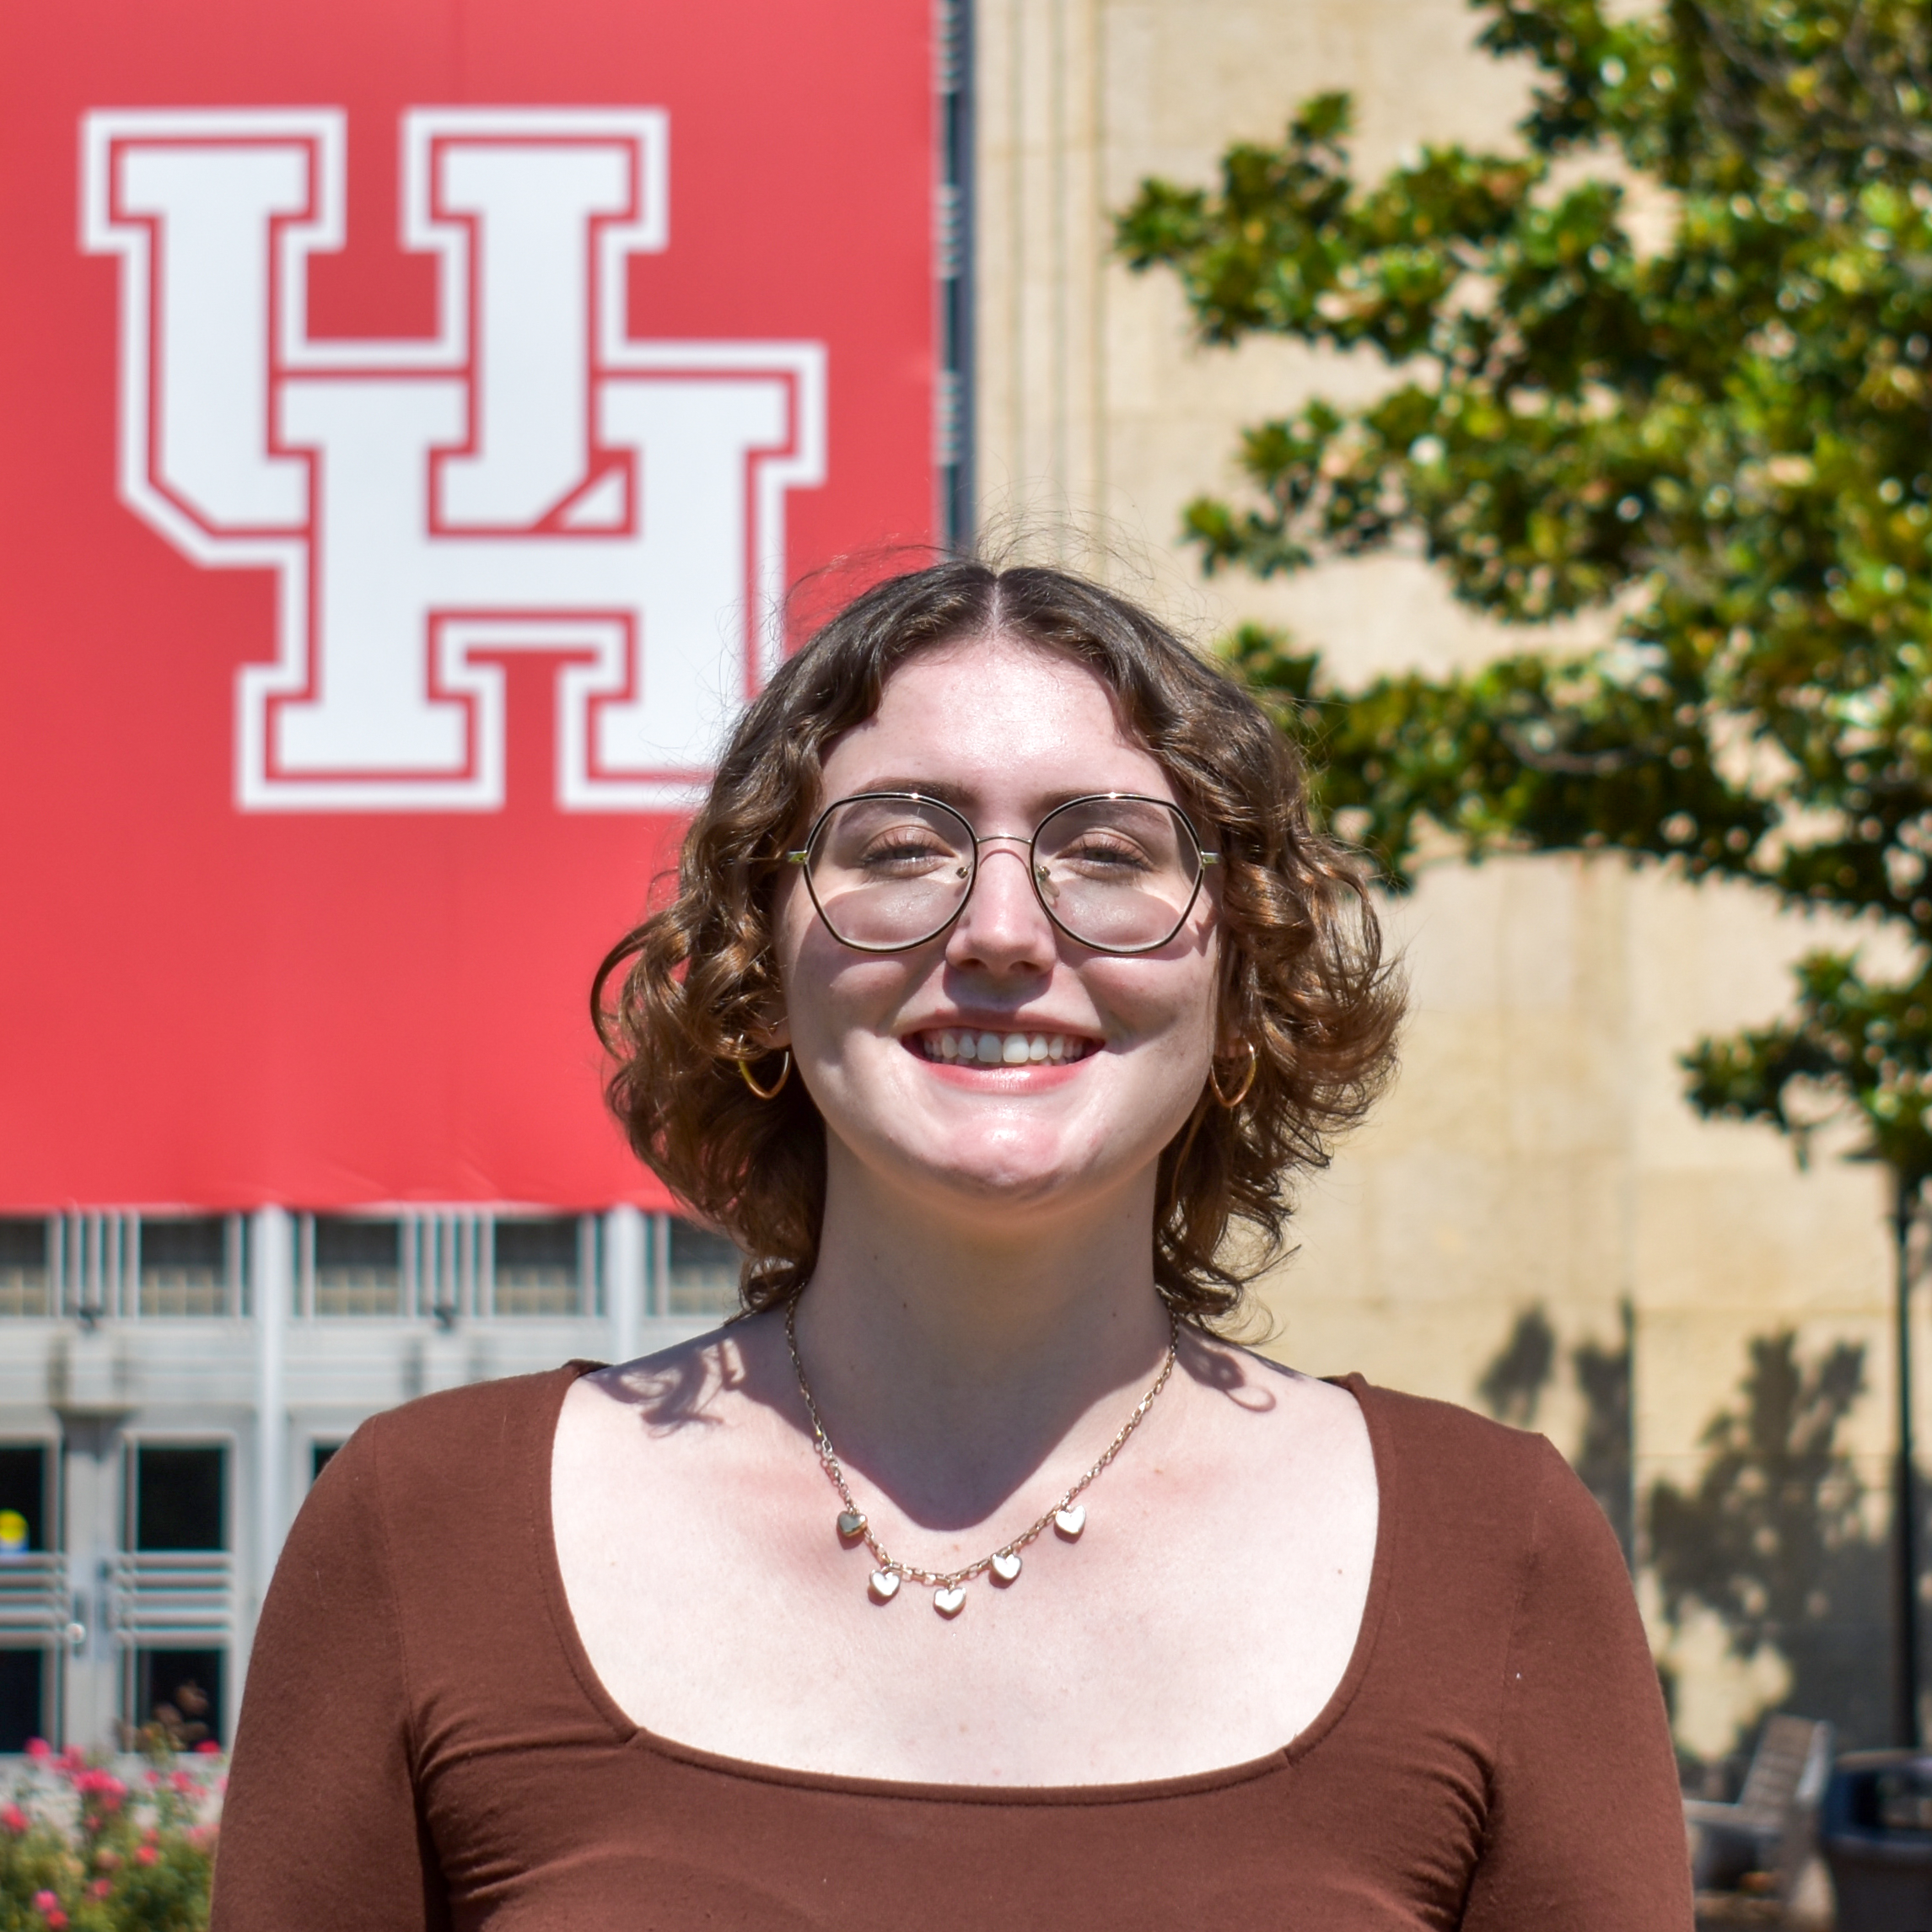 female student in front of UH banner